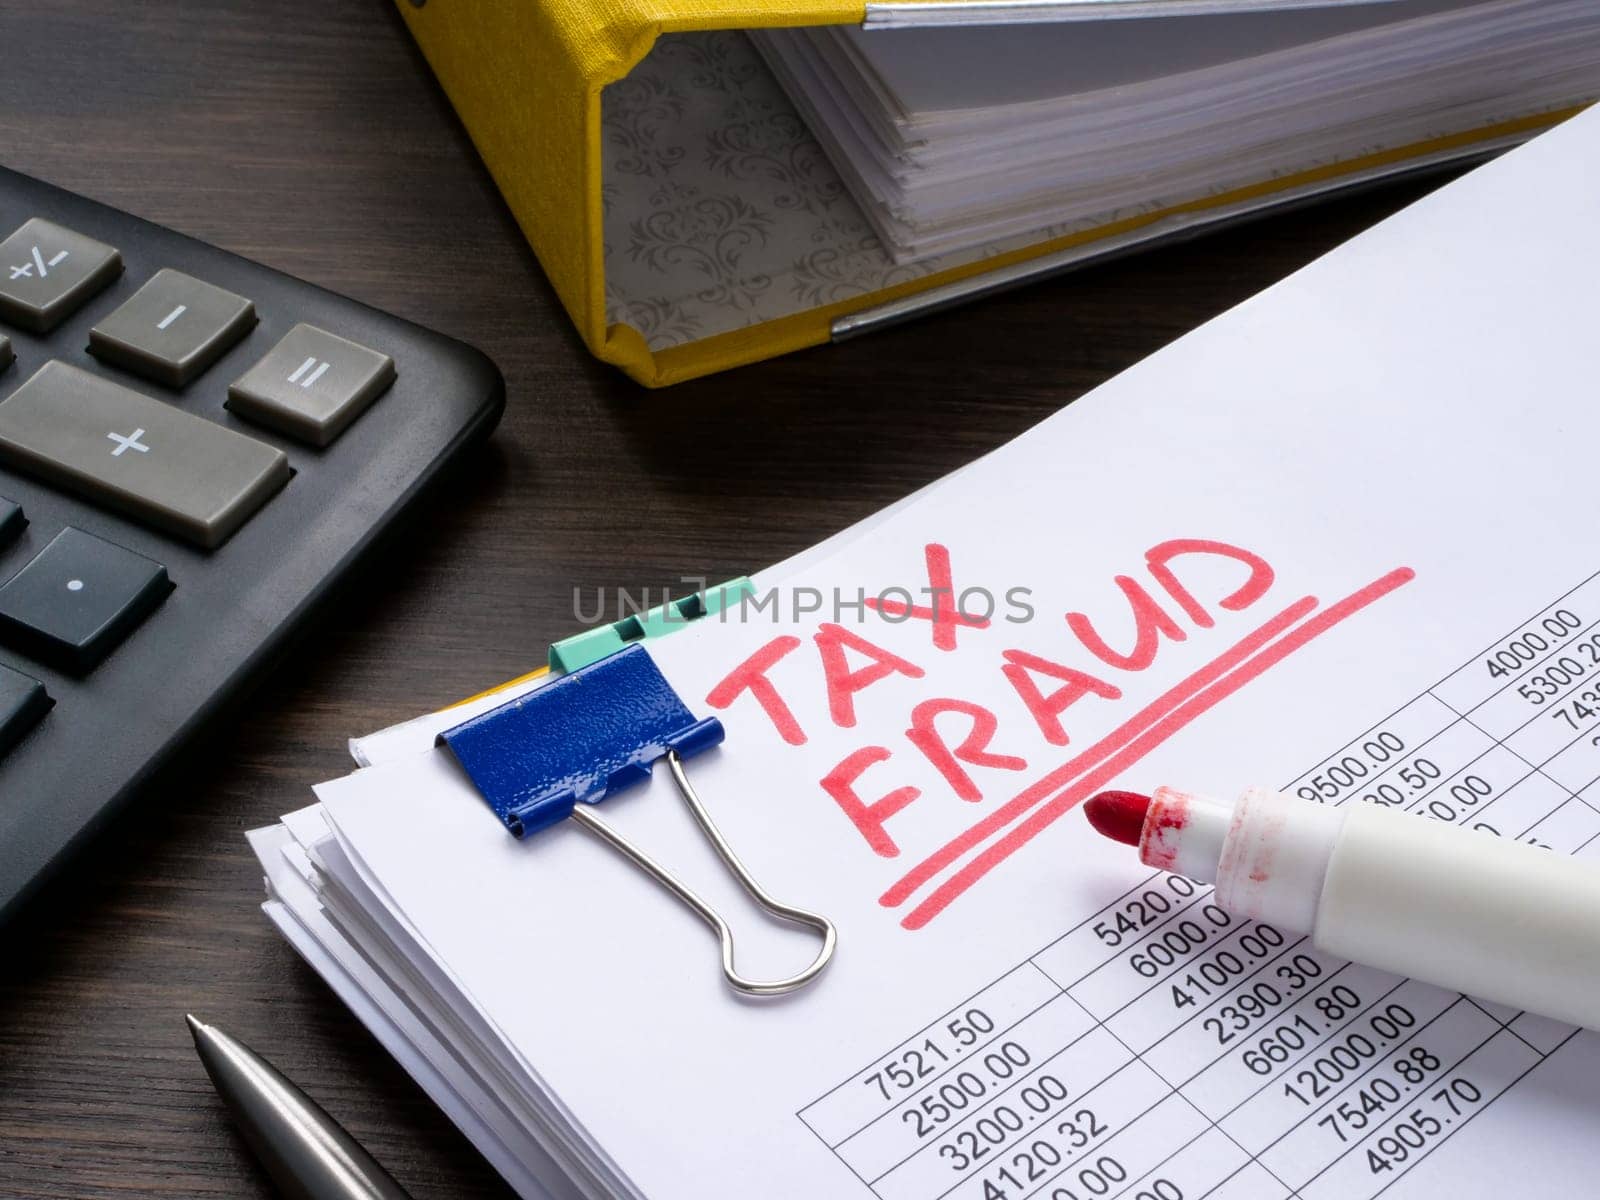 Financial reporting and marking with marker tax fraud.